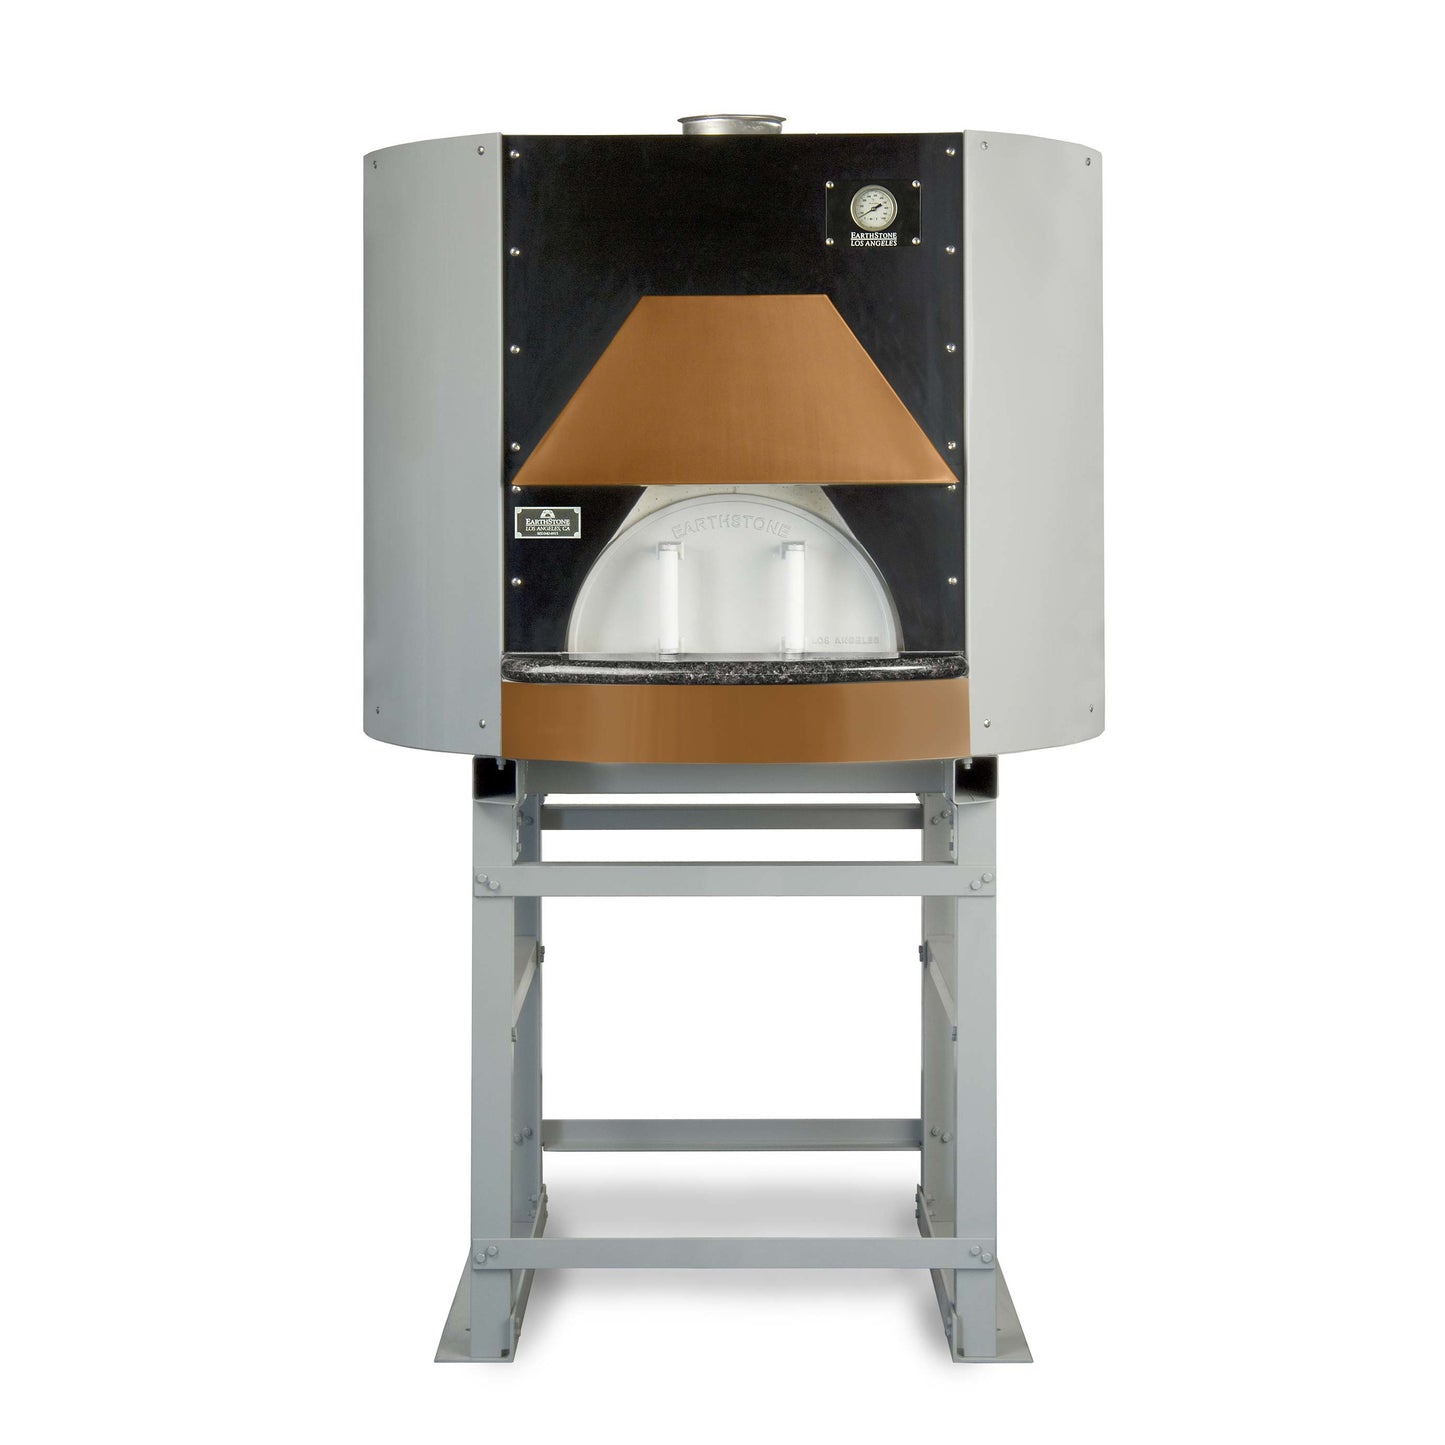 WOOD FIRED PRE-ASSEMBLED OVEN - Model 90-PA